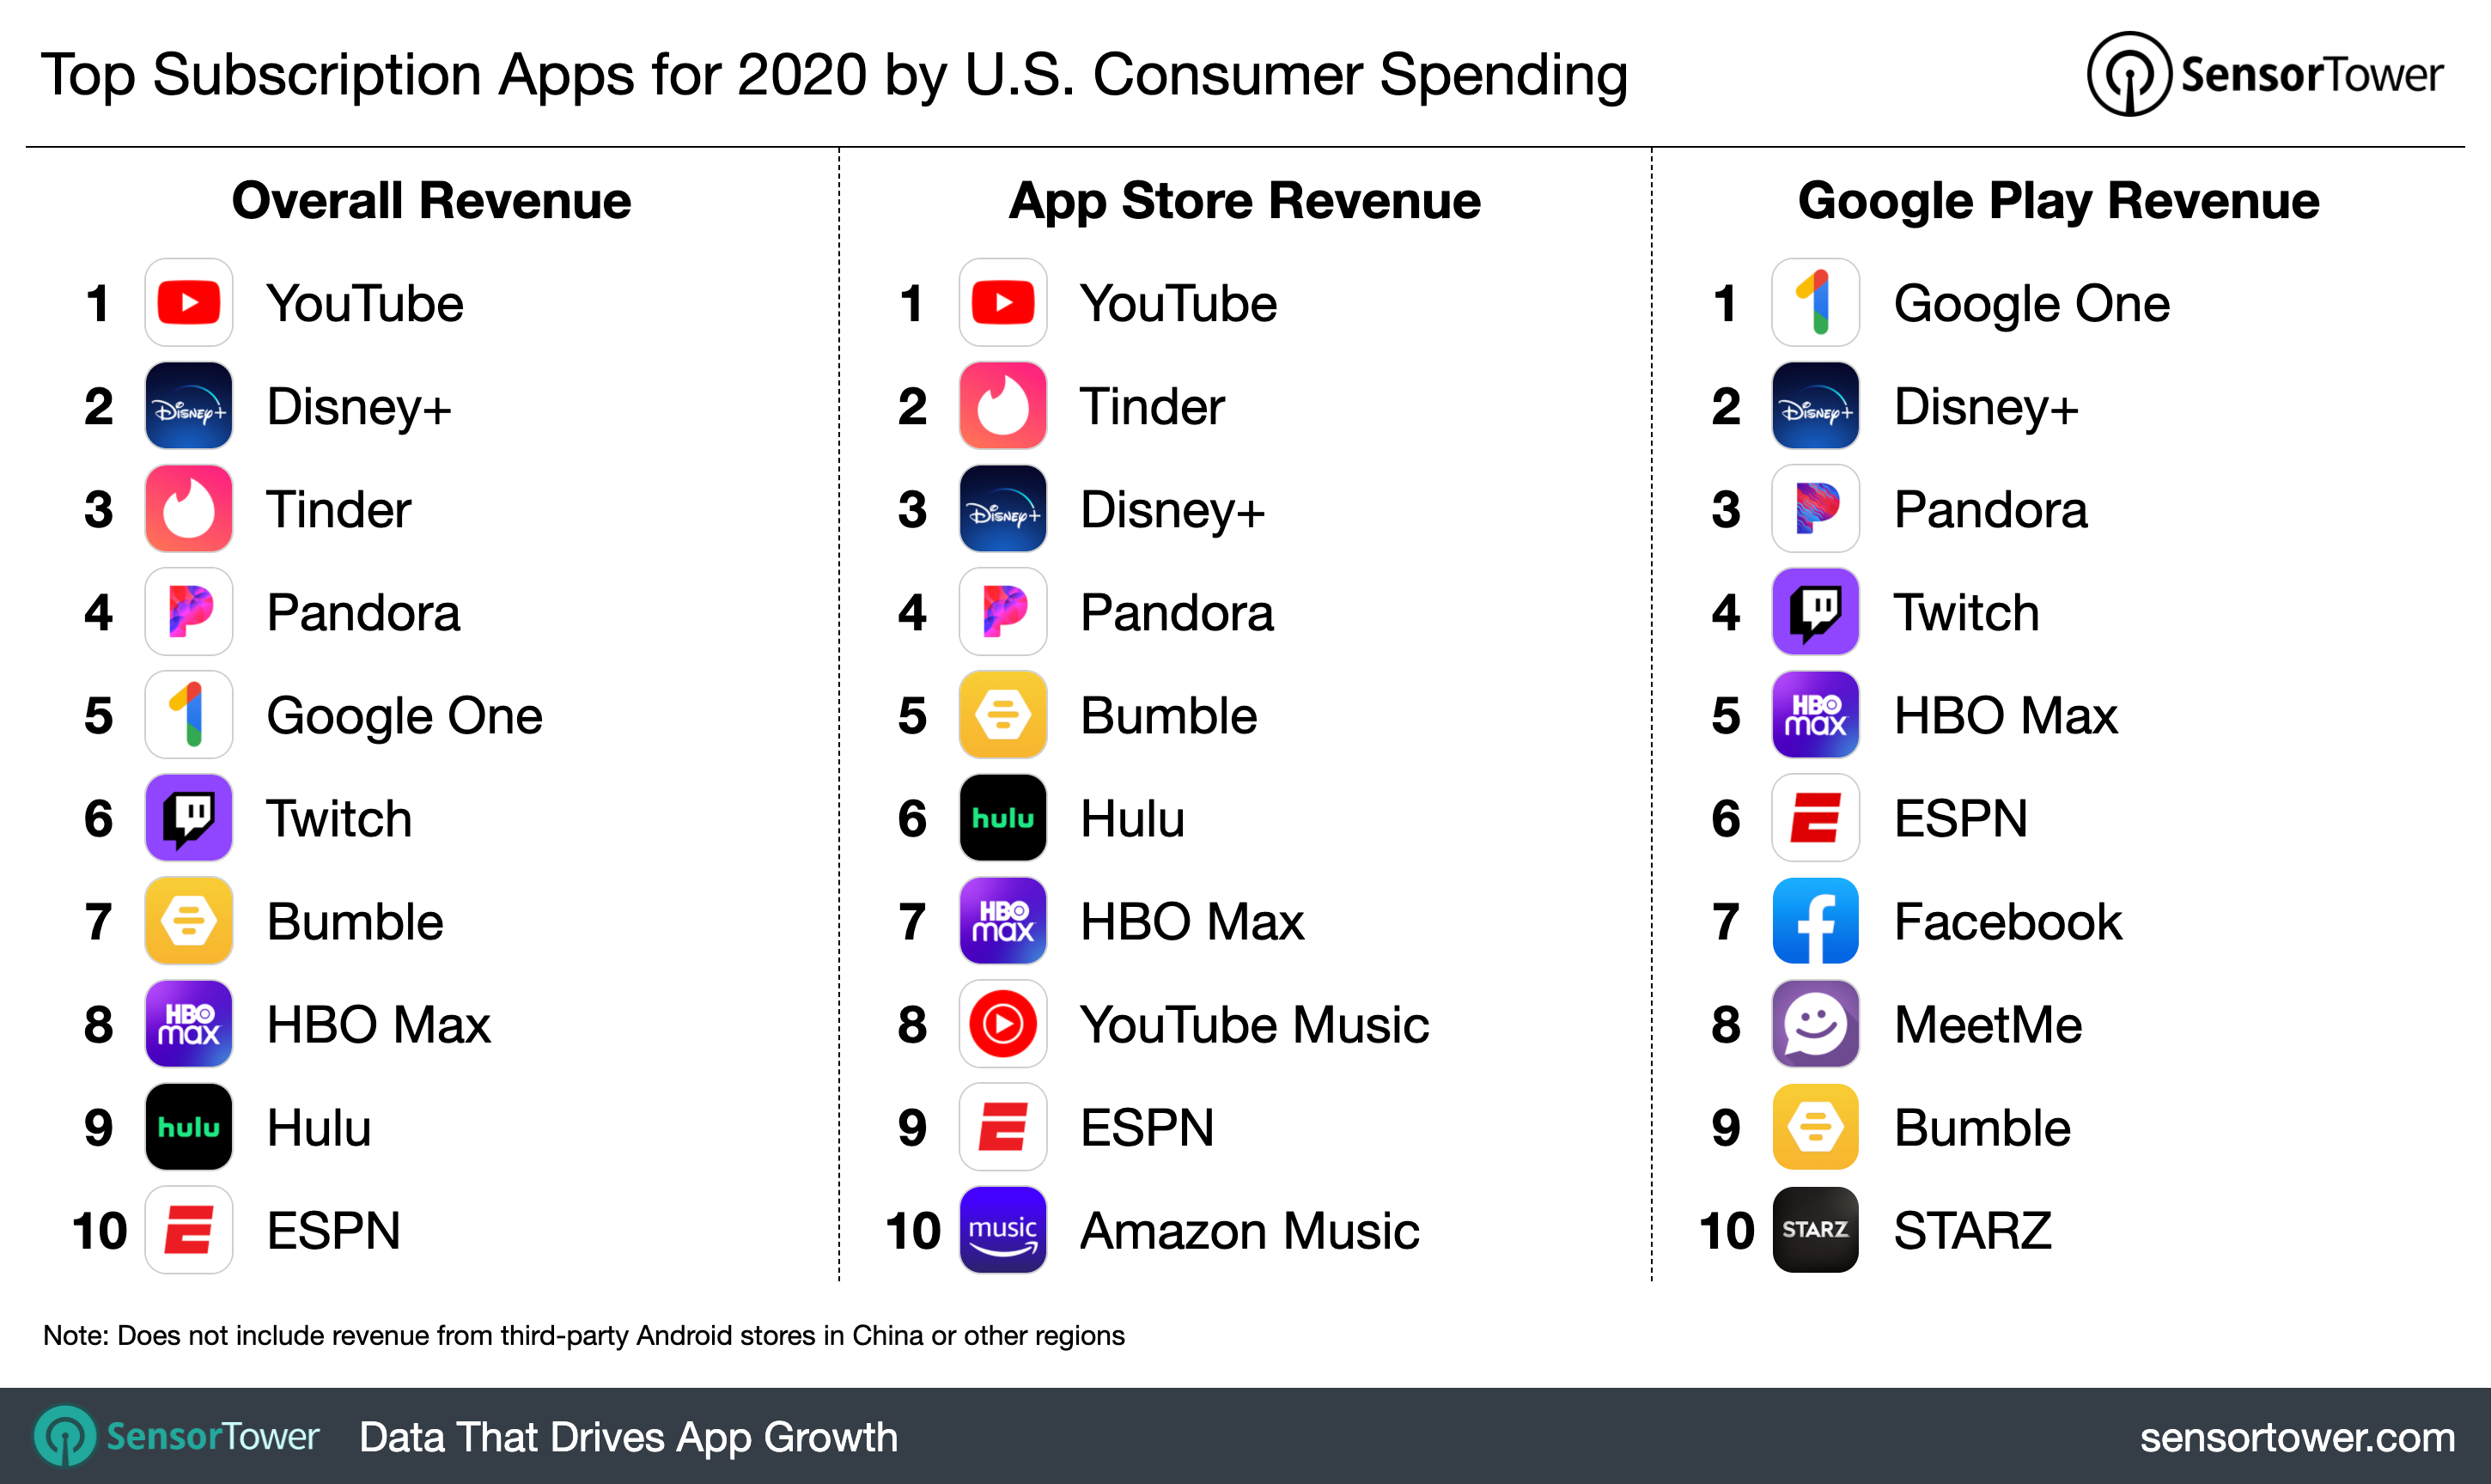 YouTube was the subscription app leader across both stores